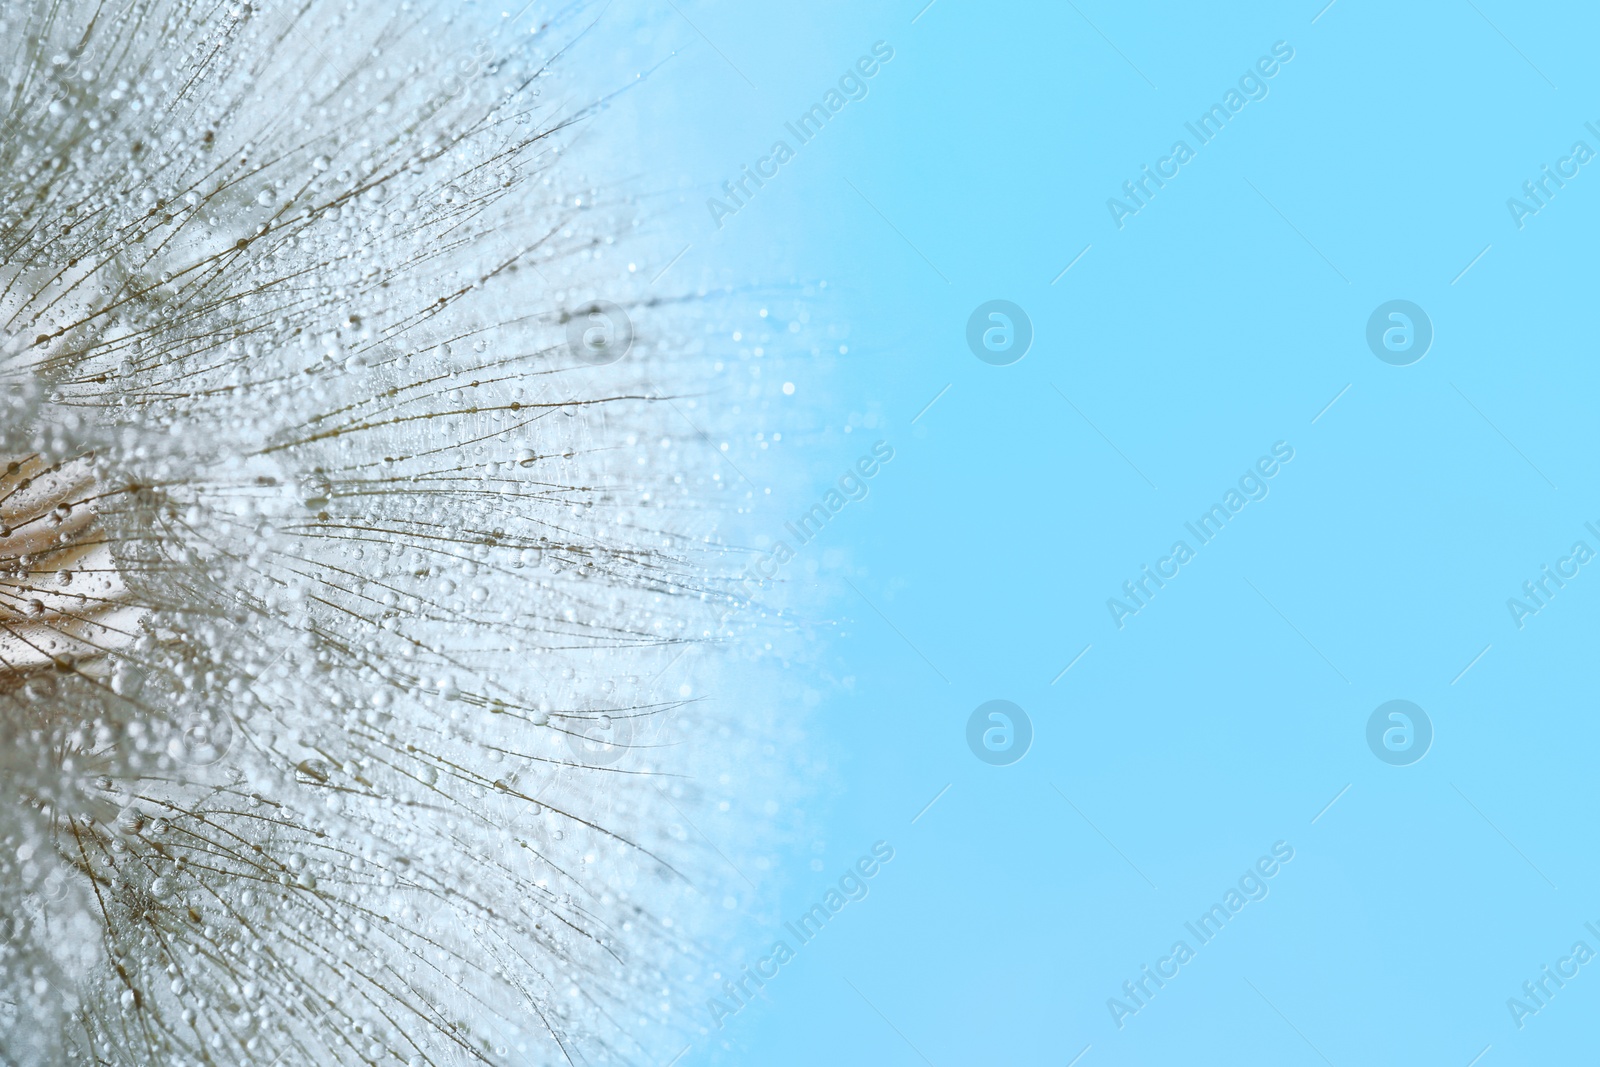 Photo of Dandelion seeds with dew drops on color background, close up